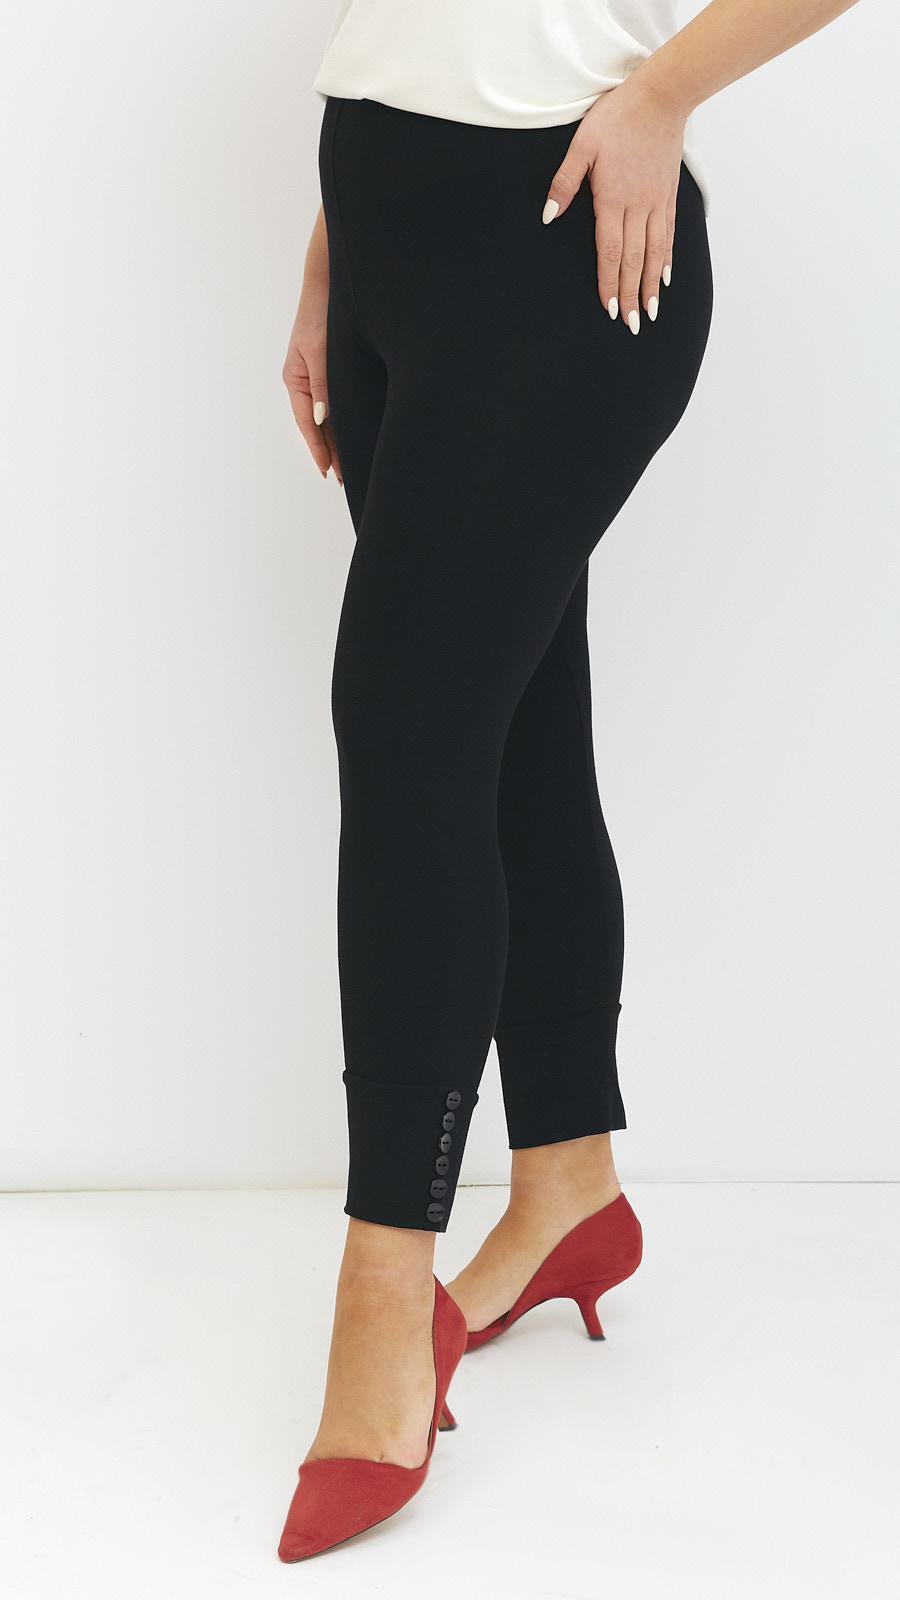 Black stylish comfortable leggings with buttons black